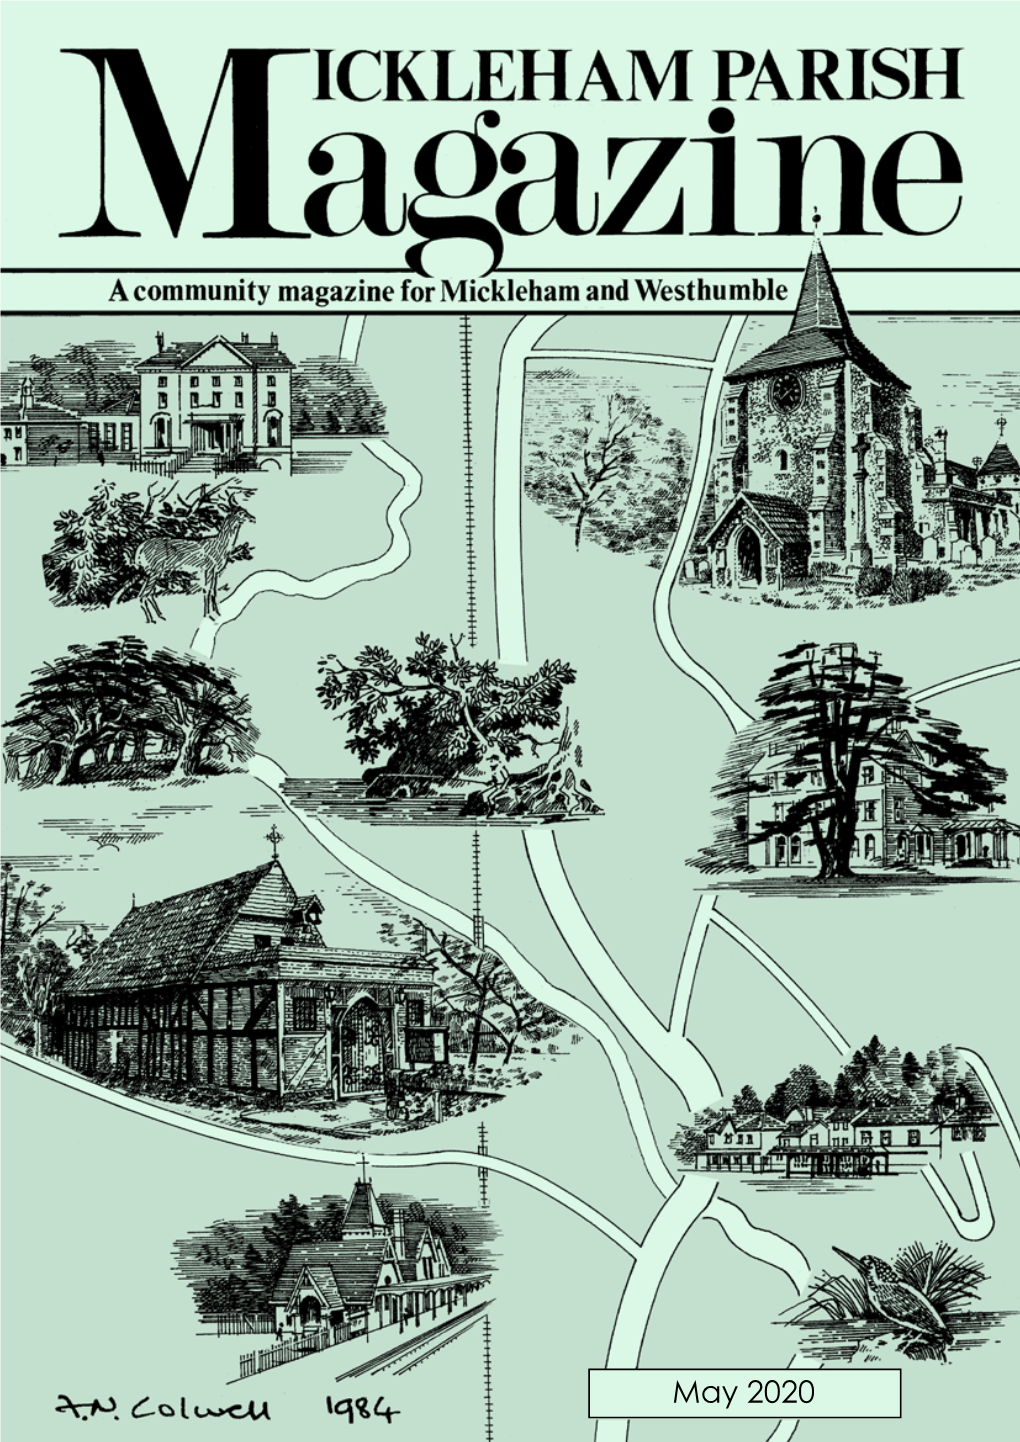 May 2020 Ickleham Parish Magazine May Mickleham Rectory Dear Friends 2020 How Fast the World Has Moved on Since Writing for Last Month’S Magazine